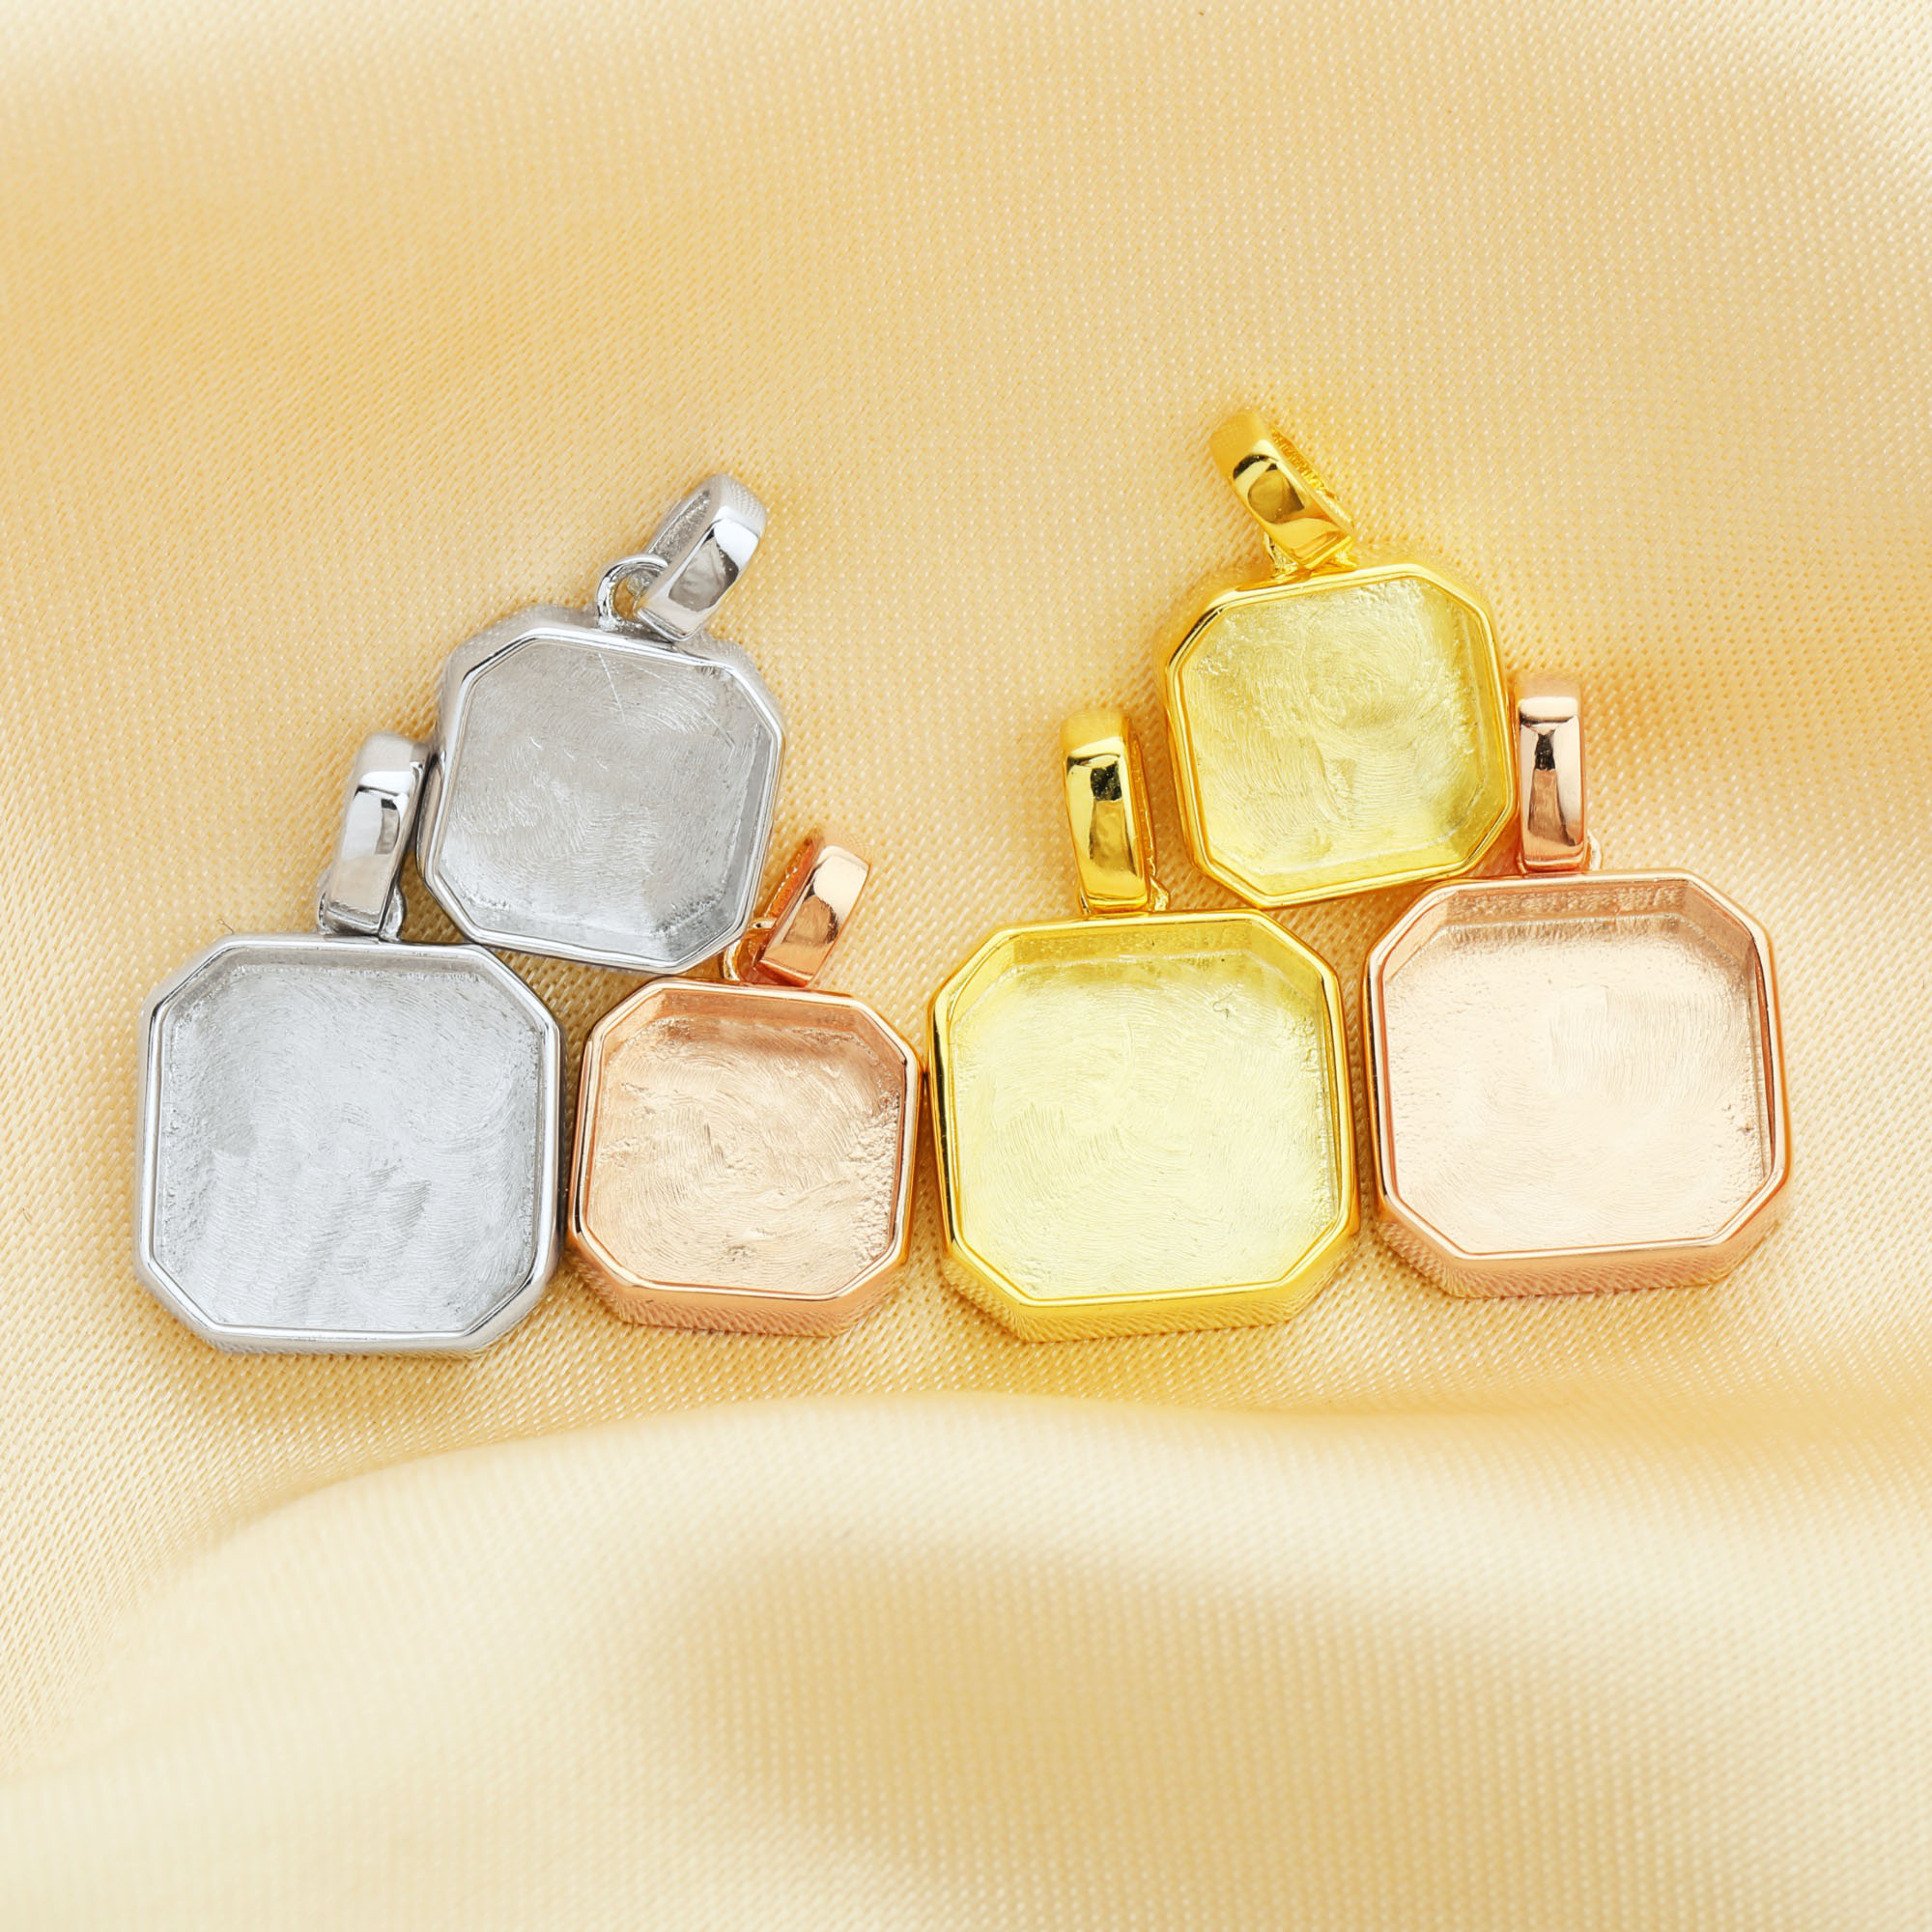 Keepsake Breast Milk Resin Square Pendant Bezel Settings,Solid 925 Sterling Silver Rose Gold Plated Pendant,DIY Memory Jewelry 1431185 - Click Image to Close